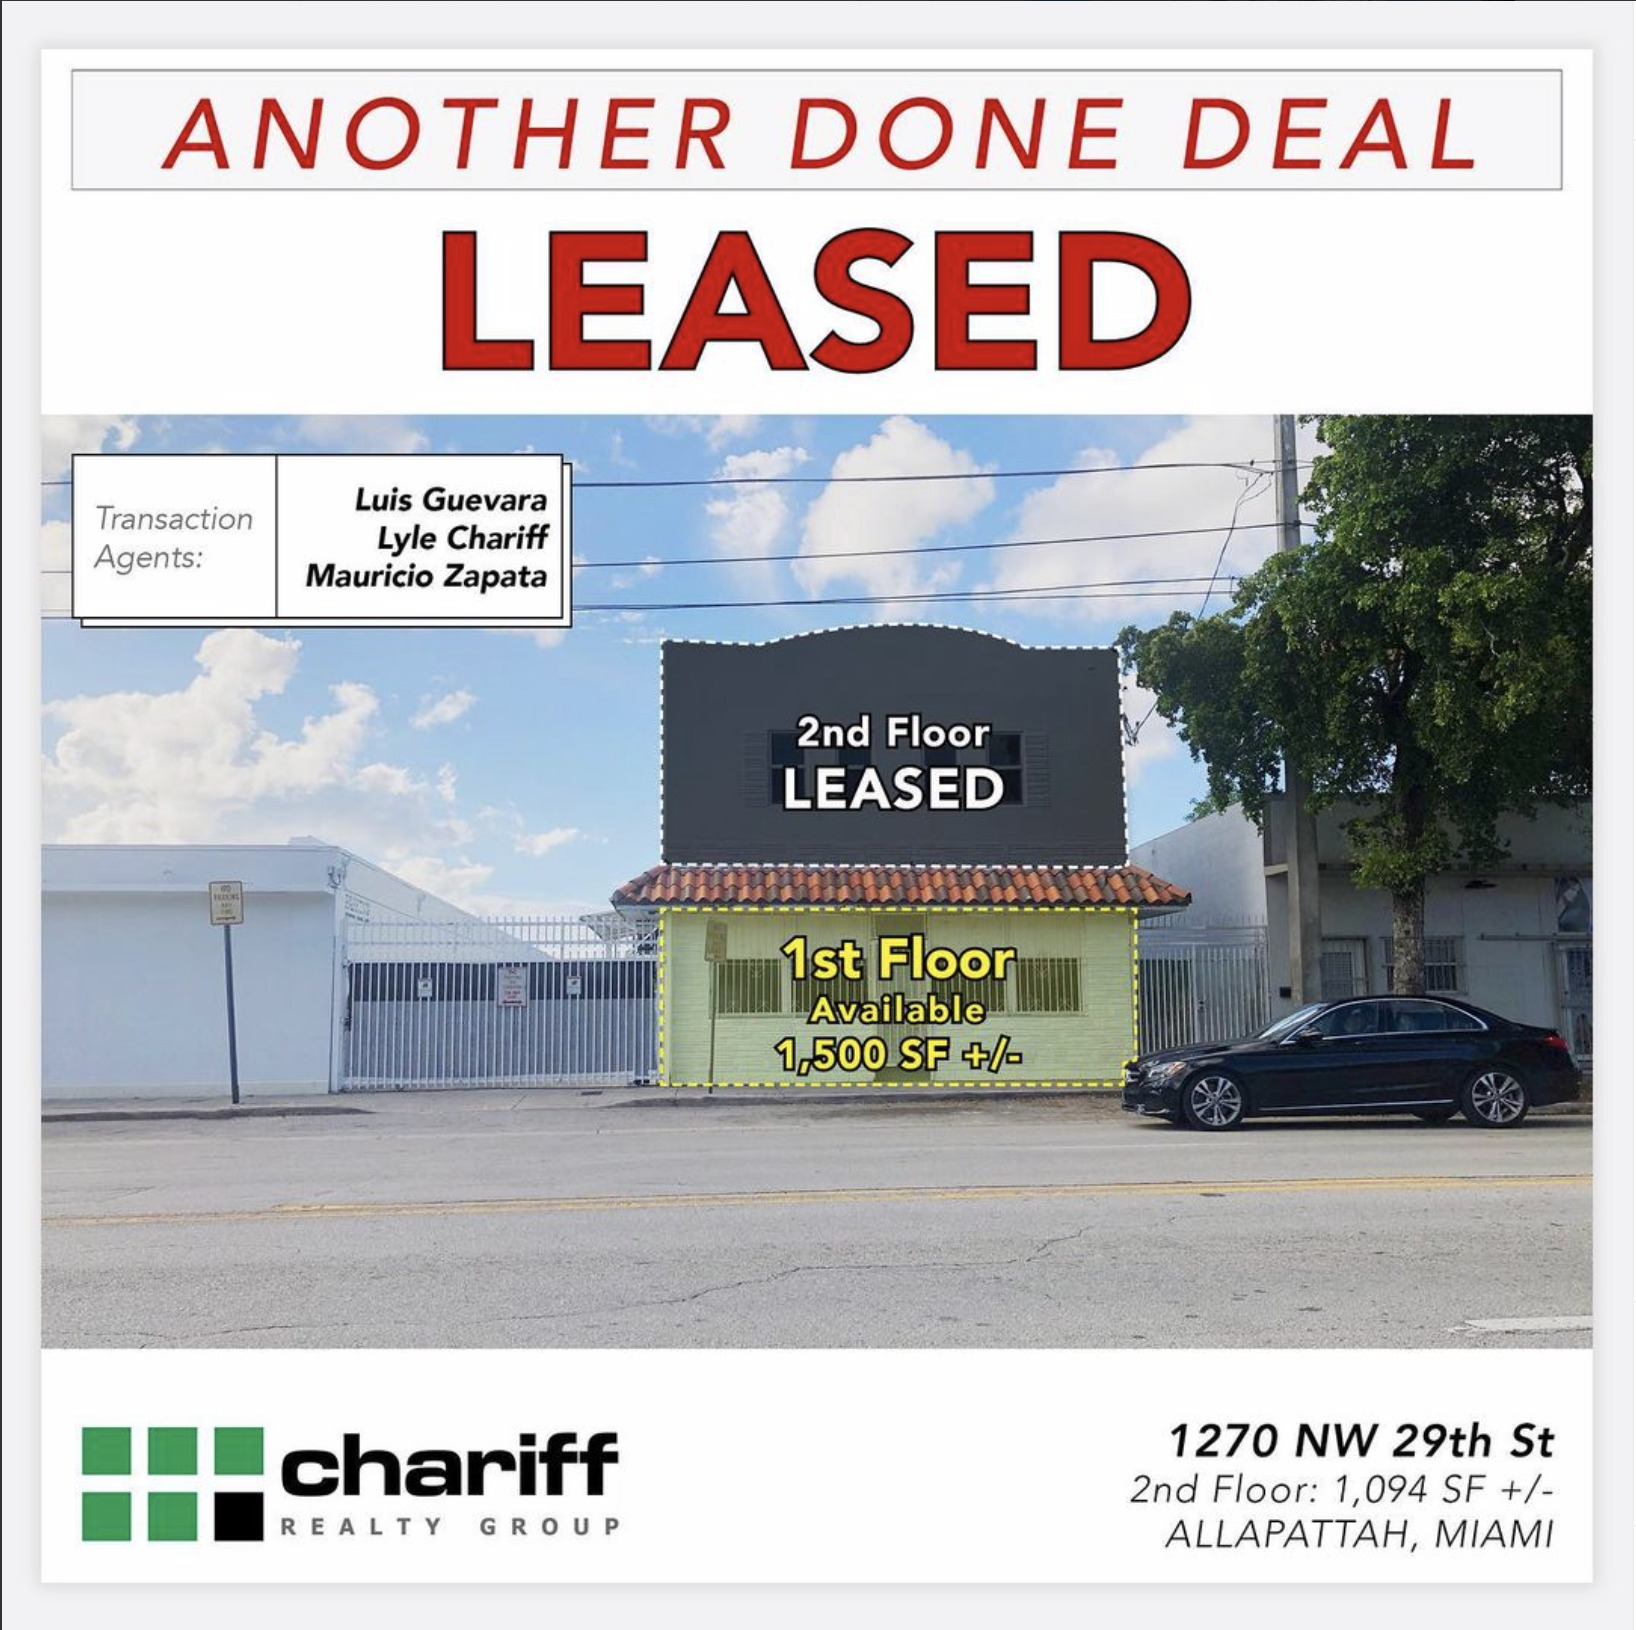 1270 NW 13th Ave - Another done deal: Leased - allapattah - miami - florida - 33142 chariff realty group